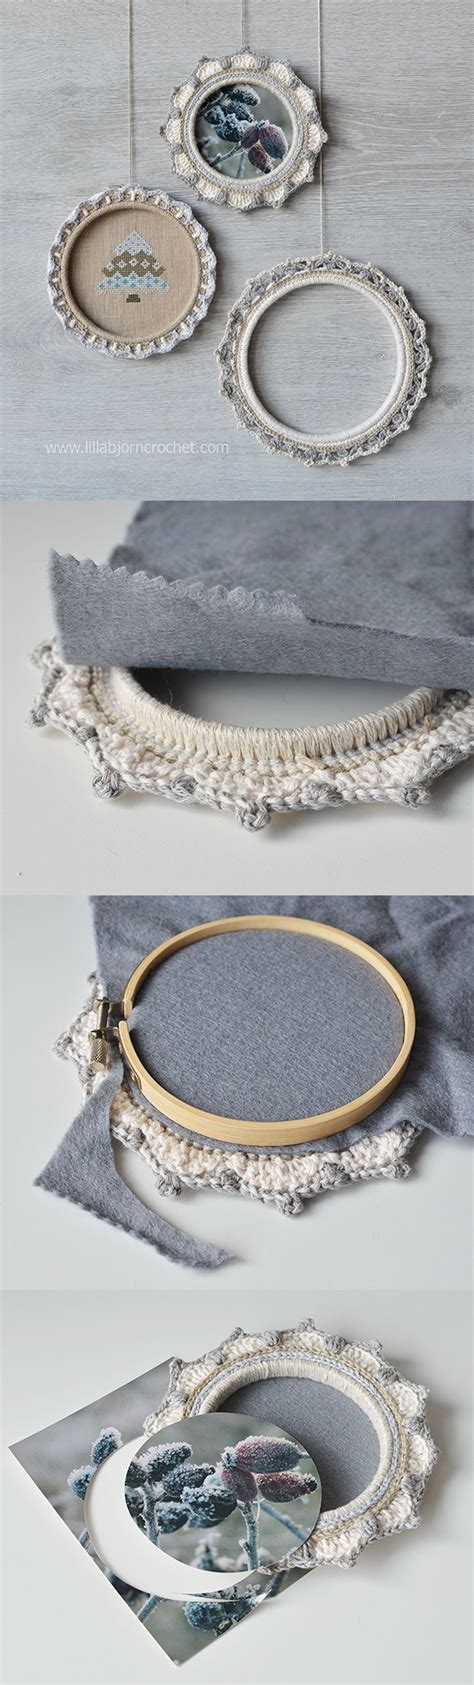 How To Turn Embroidery Hoops Into Photo Frames Tutorial Embroidery